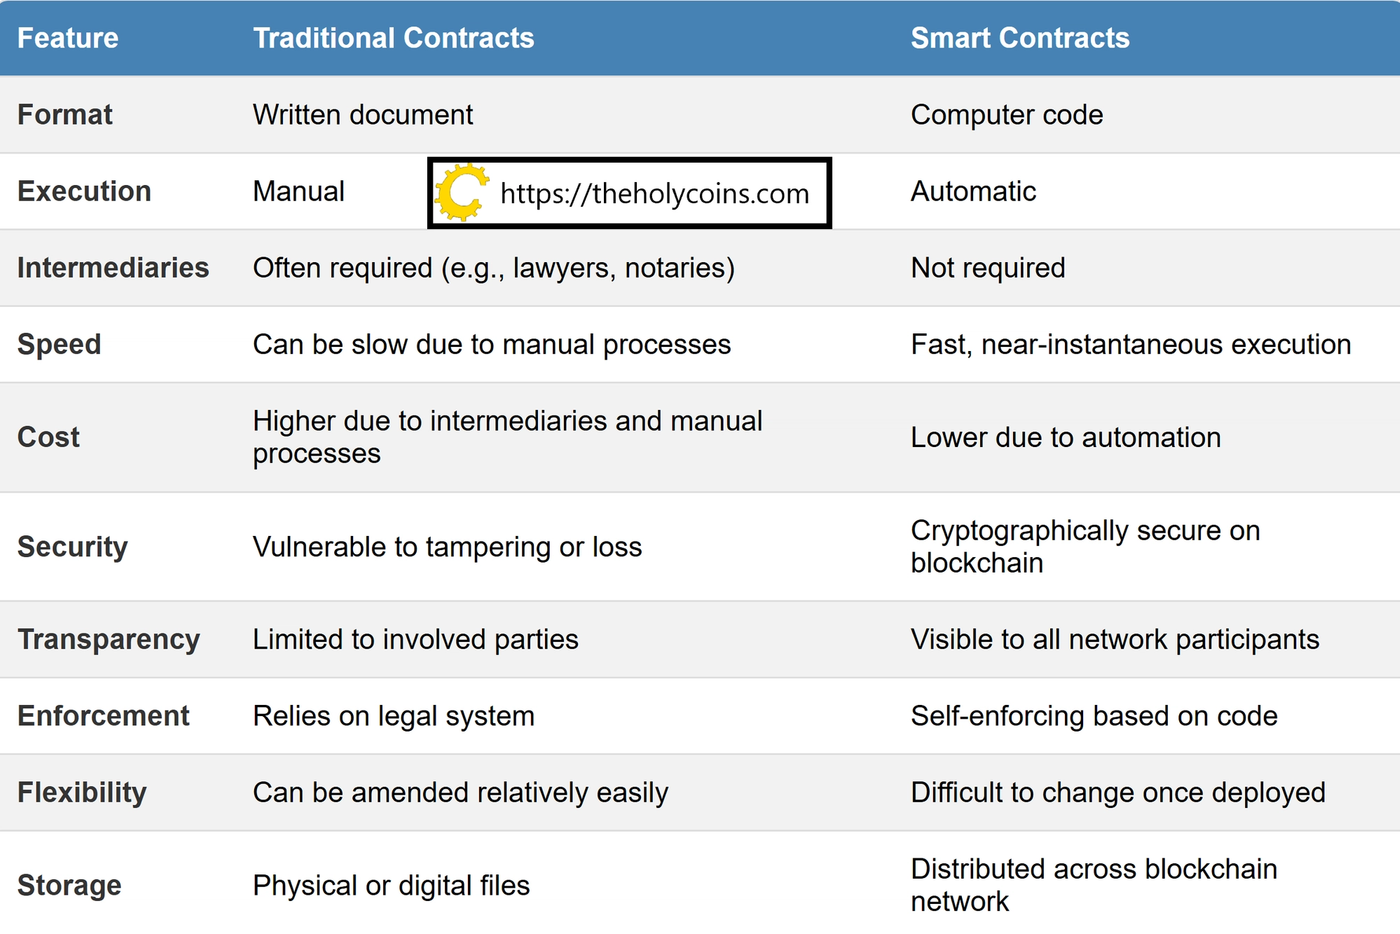 A table with three columns: Feature, Traditional Contracts, and Smart Contracts. It has 10 rows, each comparing a different criterion for the two types of contracts.